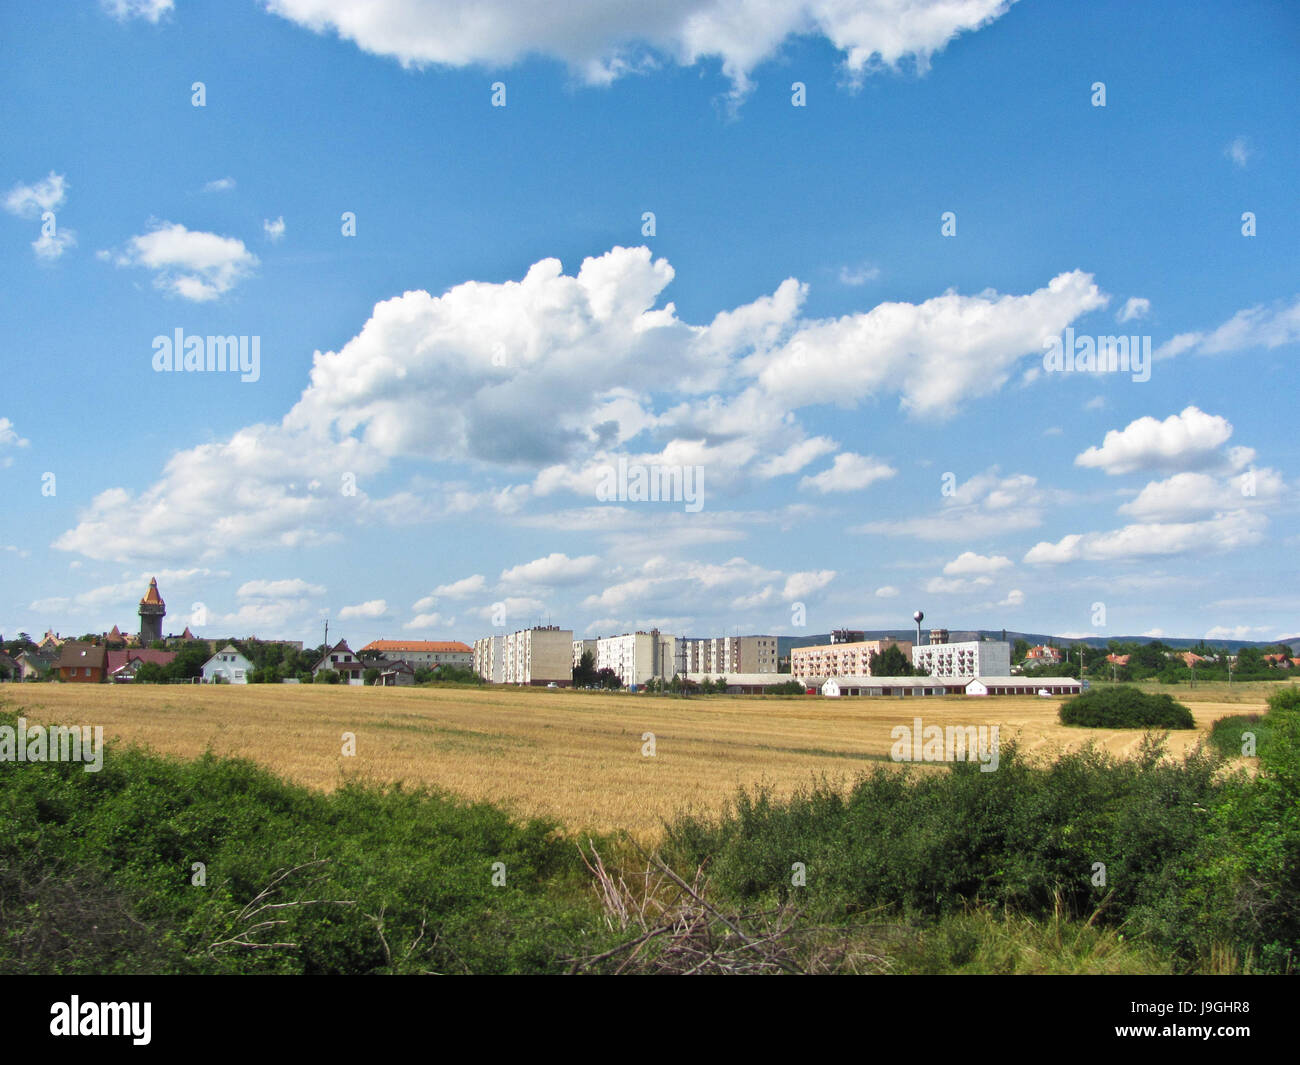 View of the small city from window of train Stock Photo